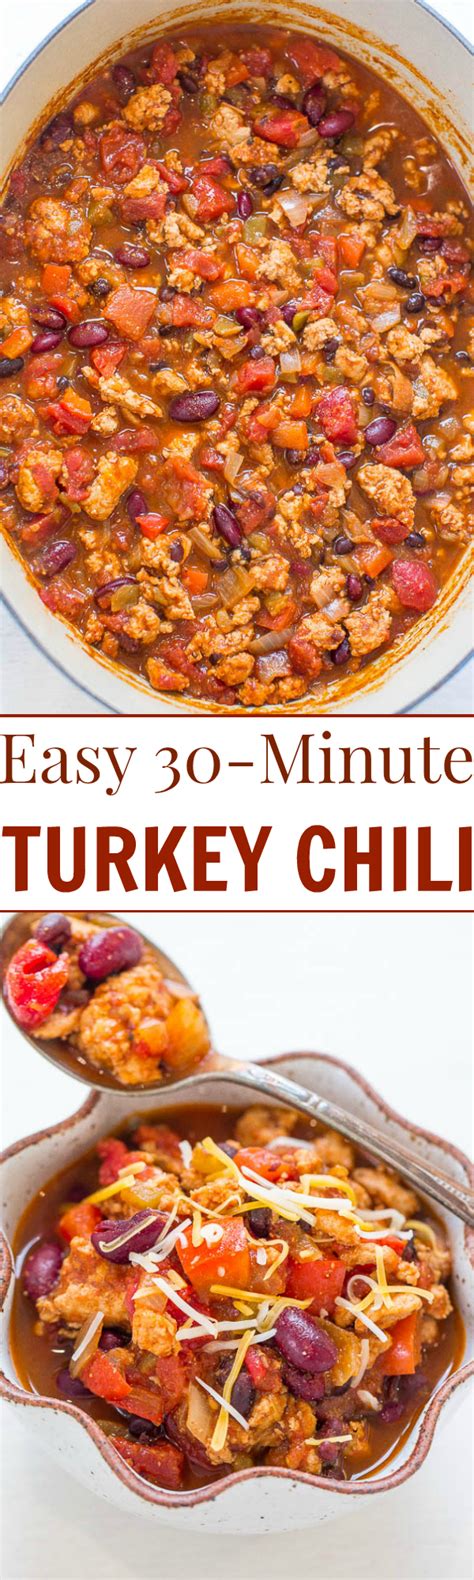 The Best Healthy Turkey Chili Recipe Minutes Averie Cooks